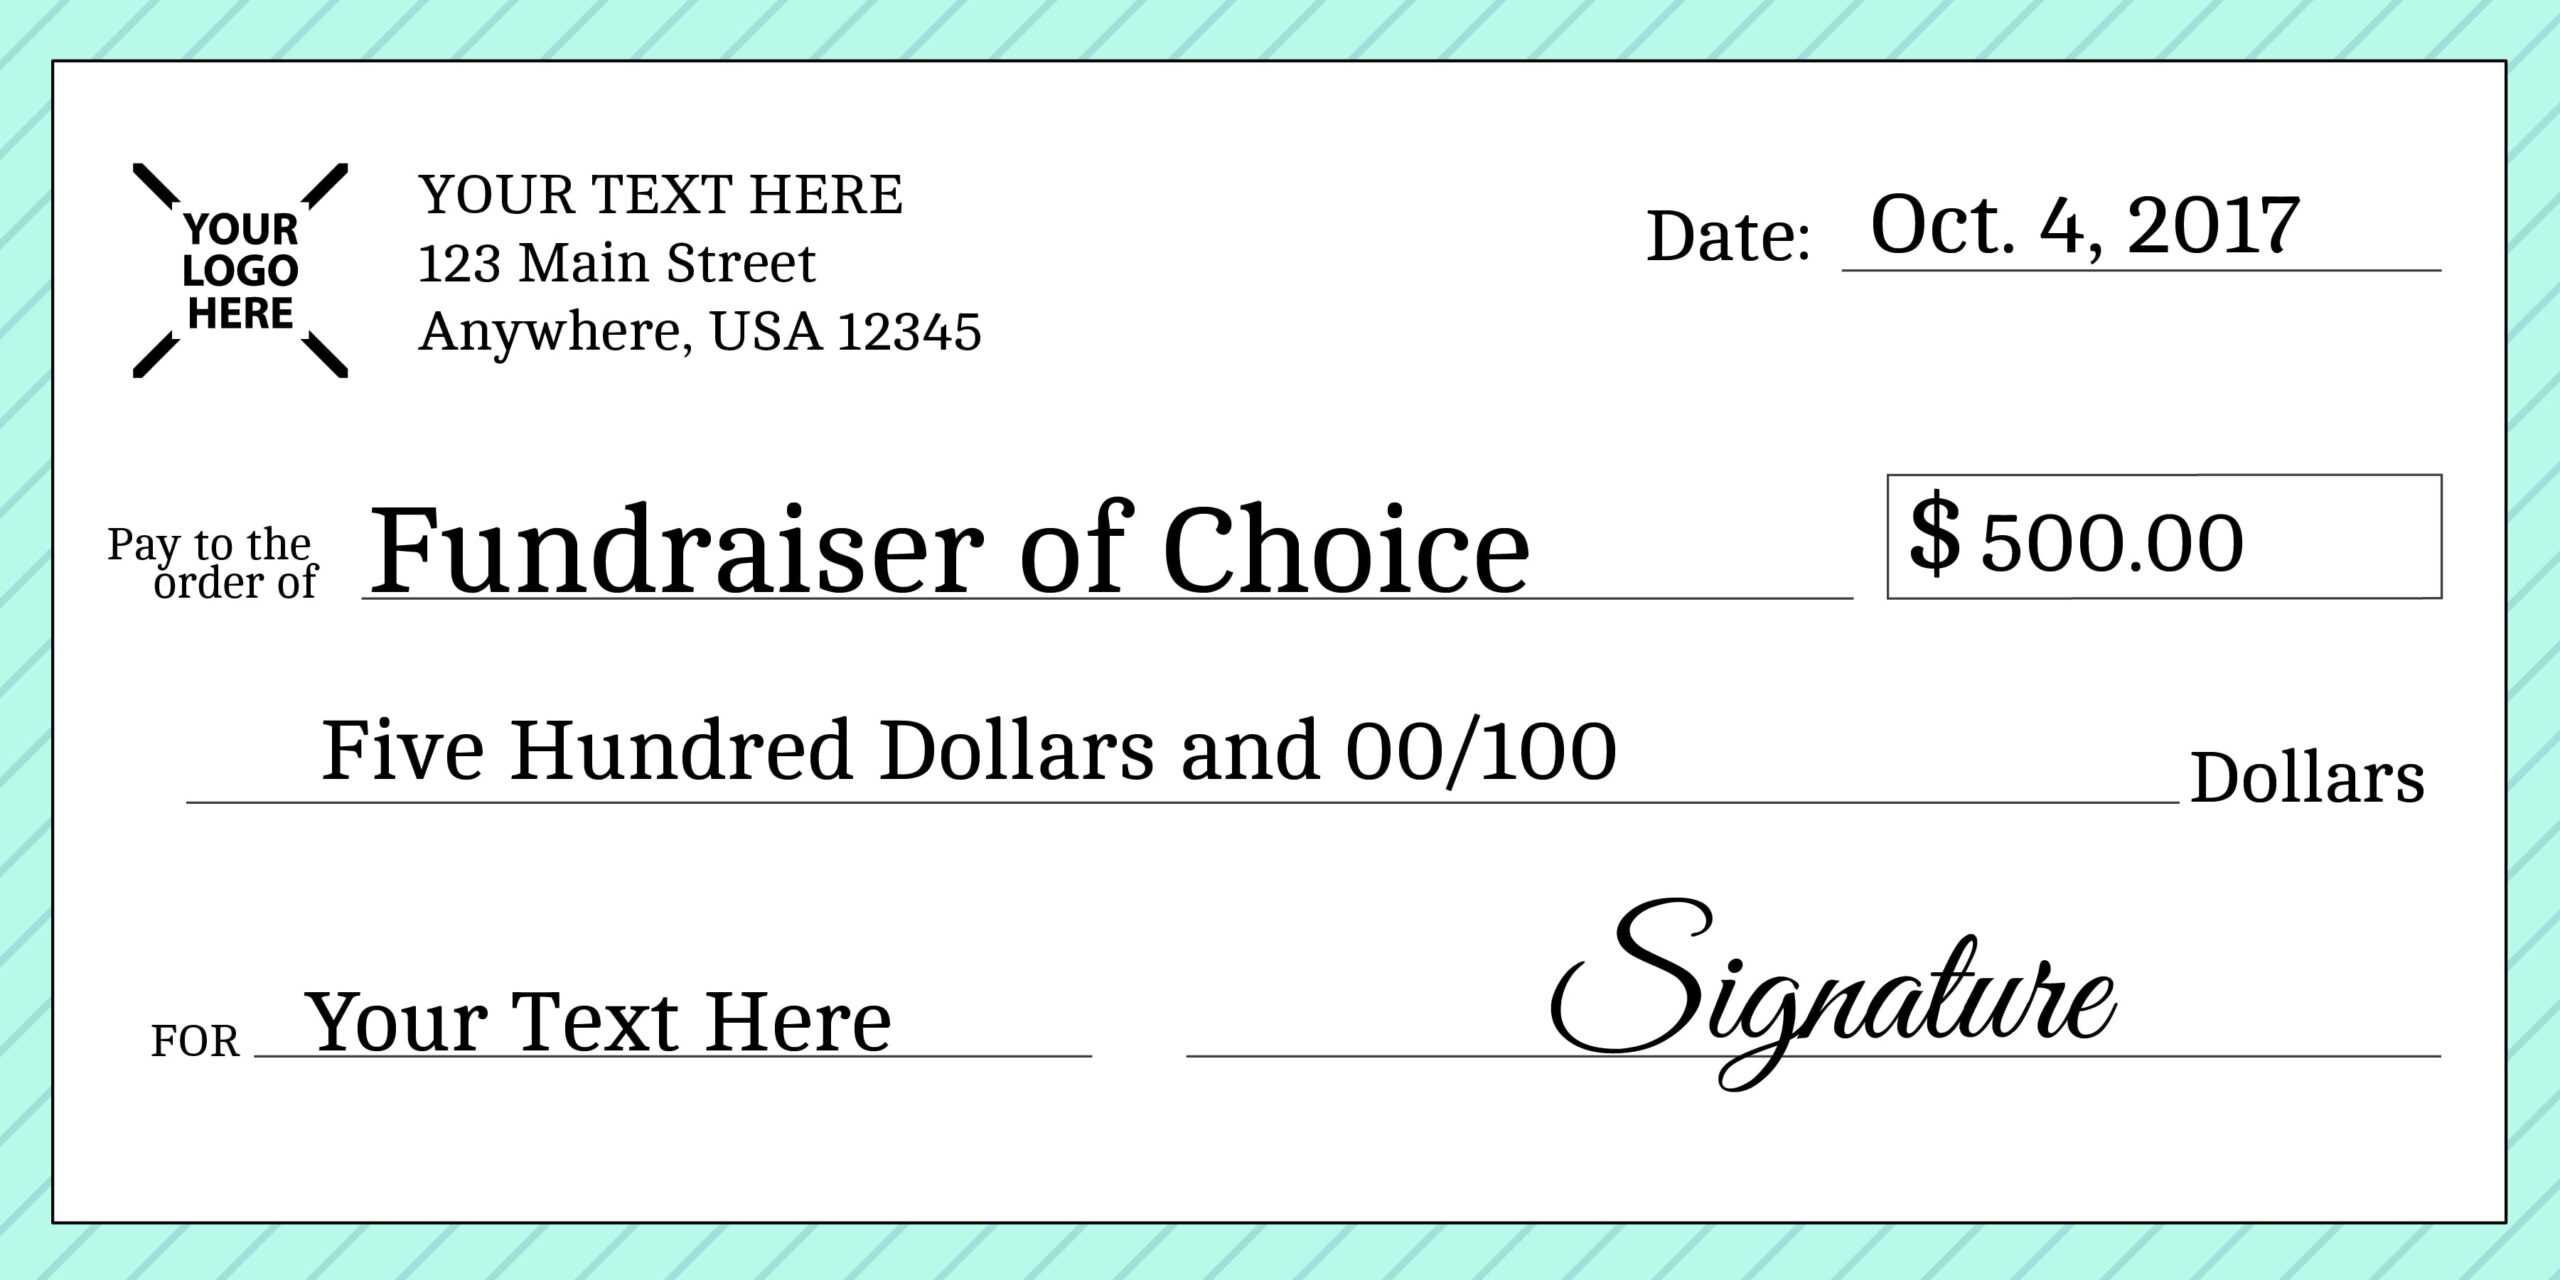 Signage 101 - Giant Check Uses And Templates | Signs Blog Throughout Customizable Blank Check Template